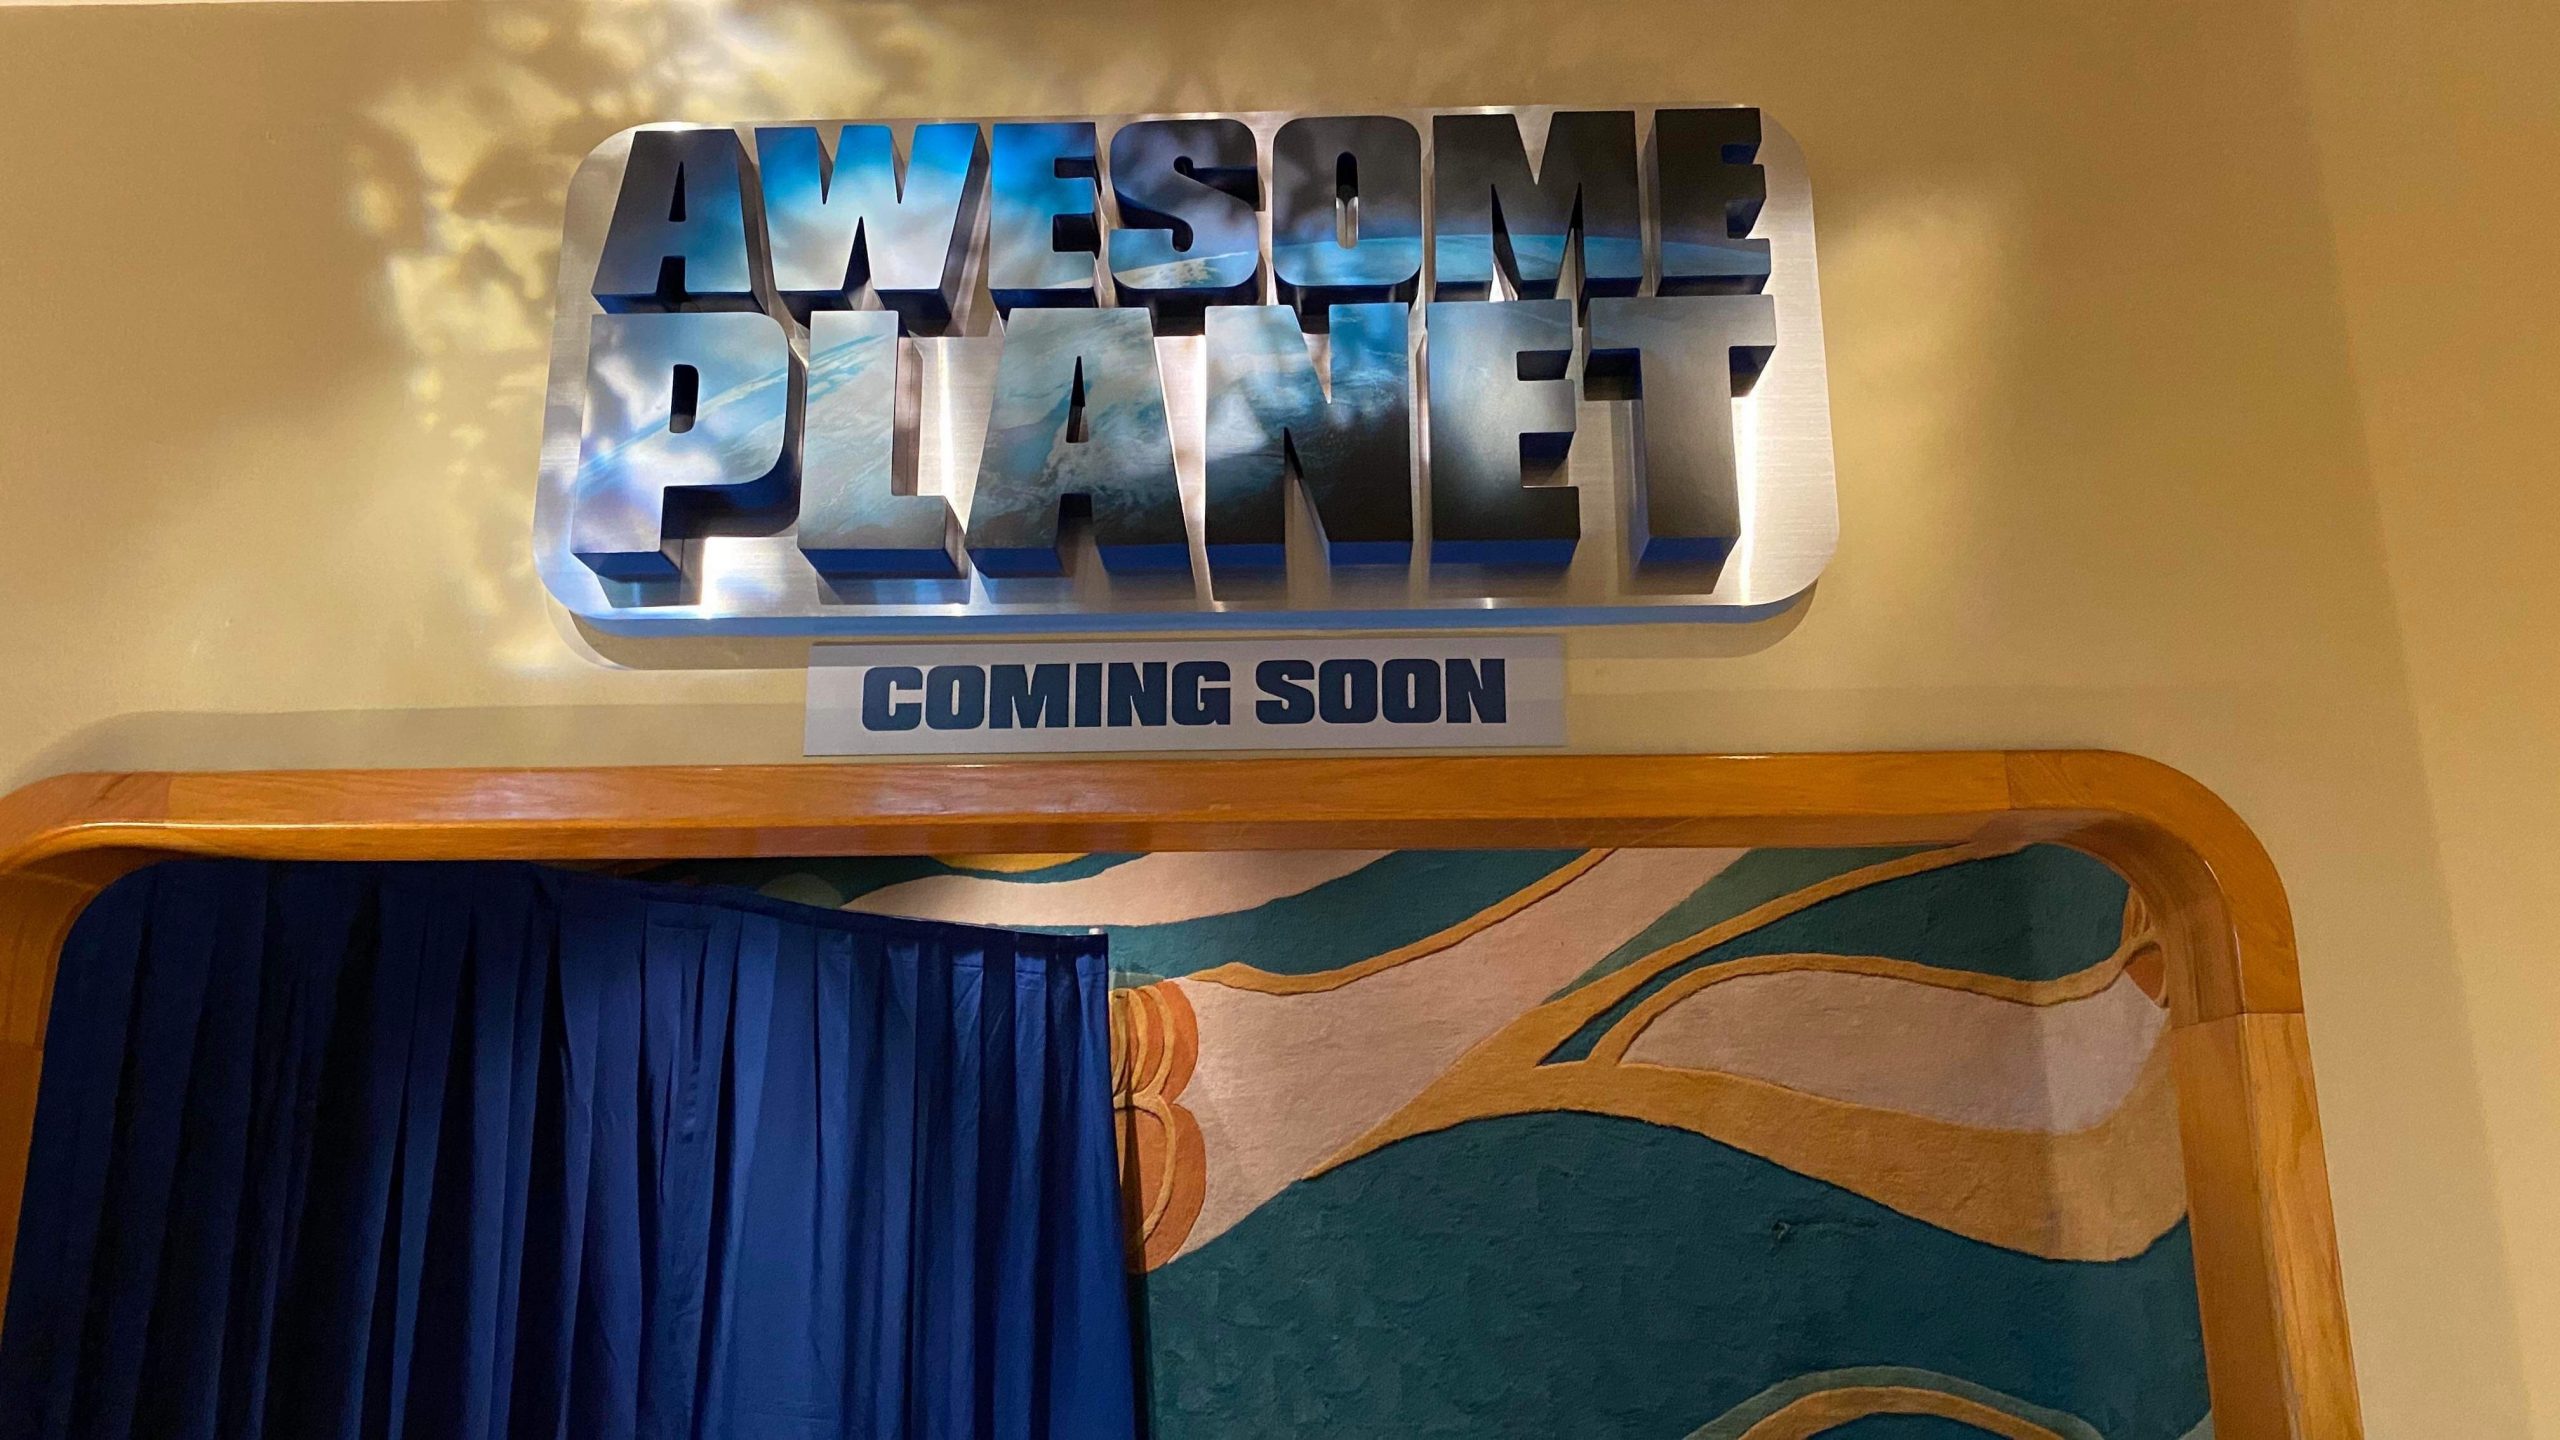 Permanent ‘Awesome Planet’ Sign Now at ‘The Land’ in Epcot